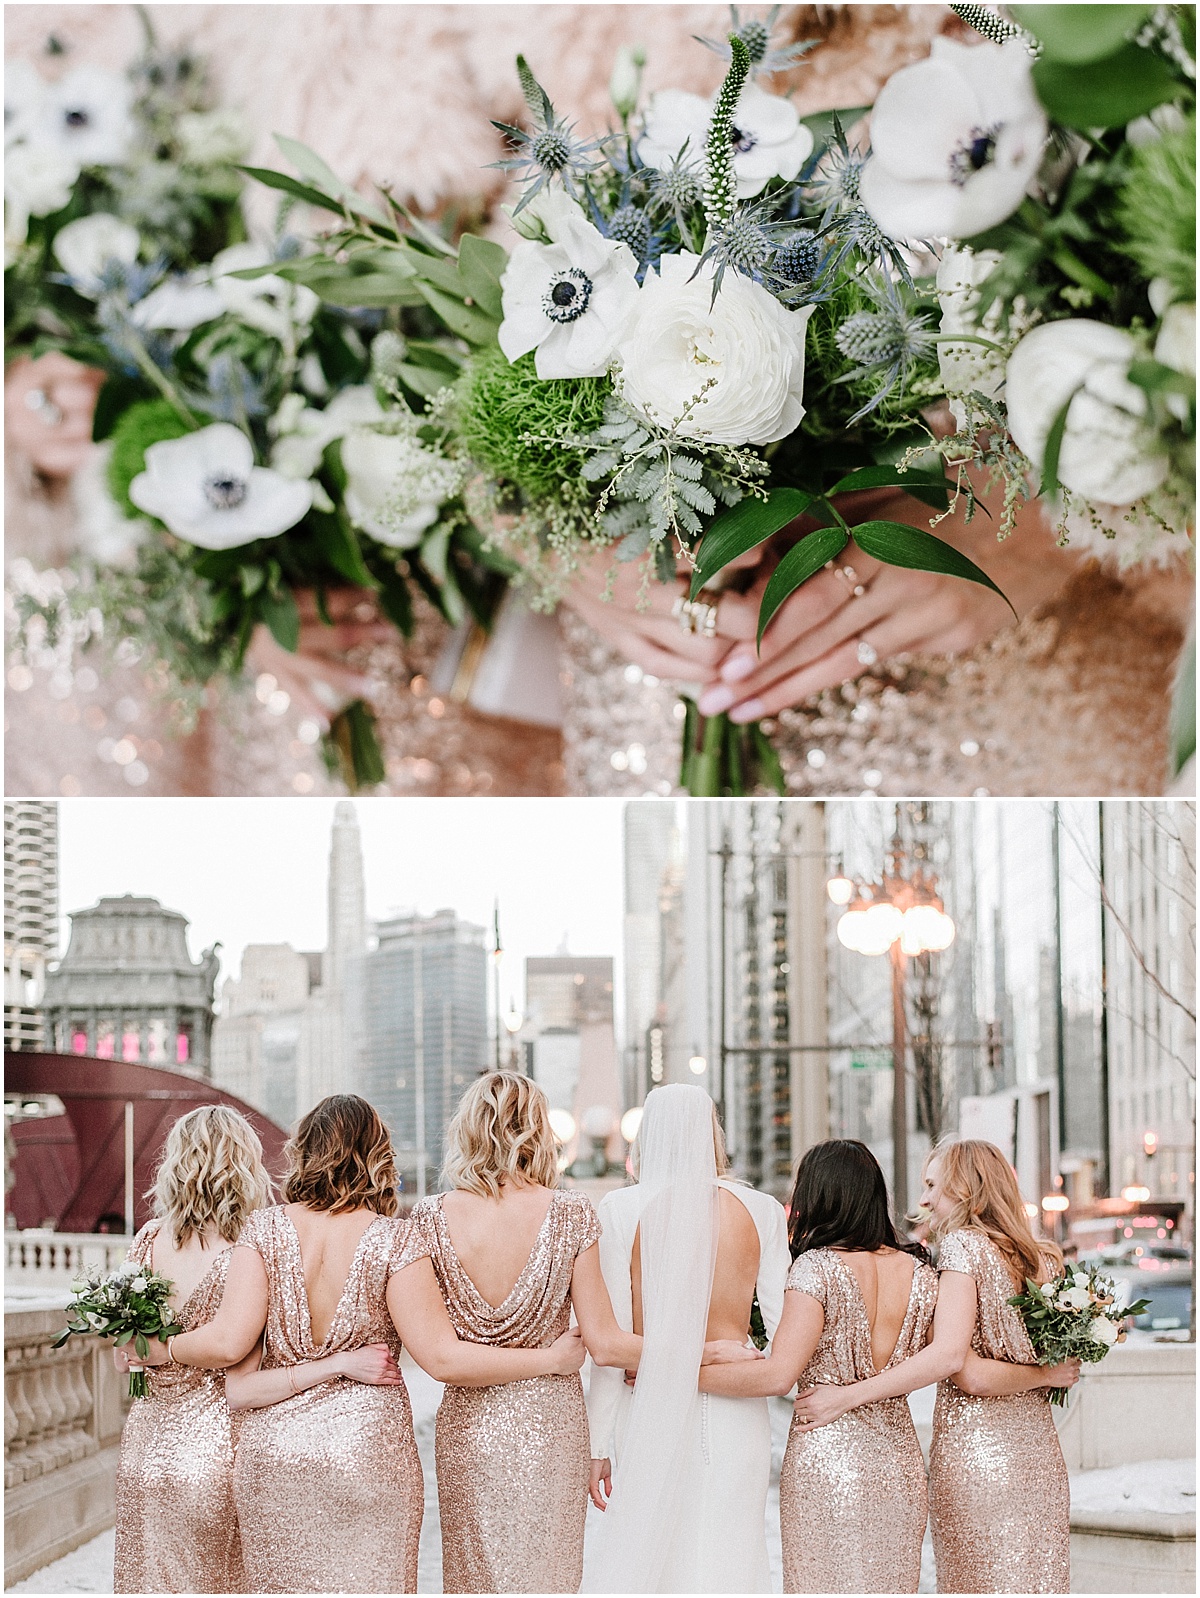 bridesmaids wearing low back dresses holding white blue and green winter bouquets